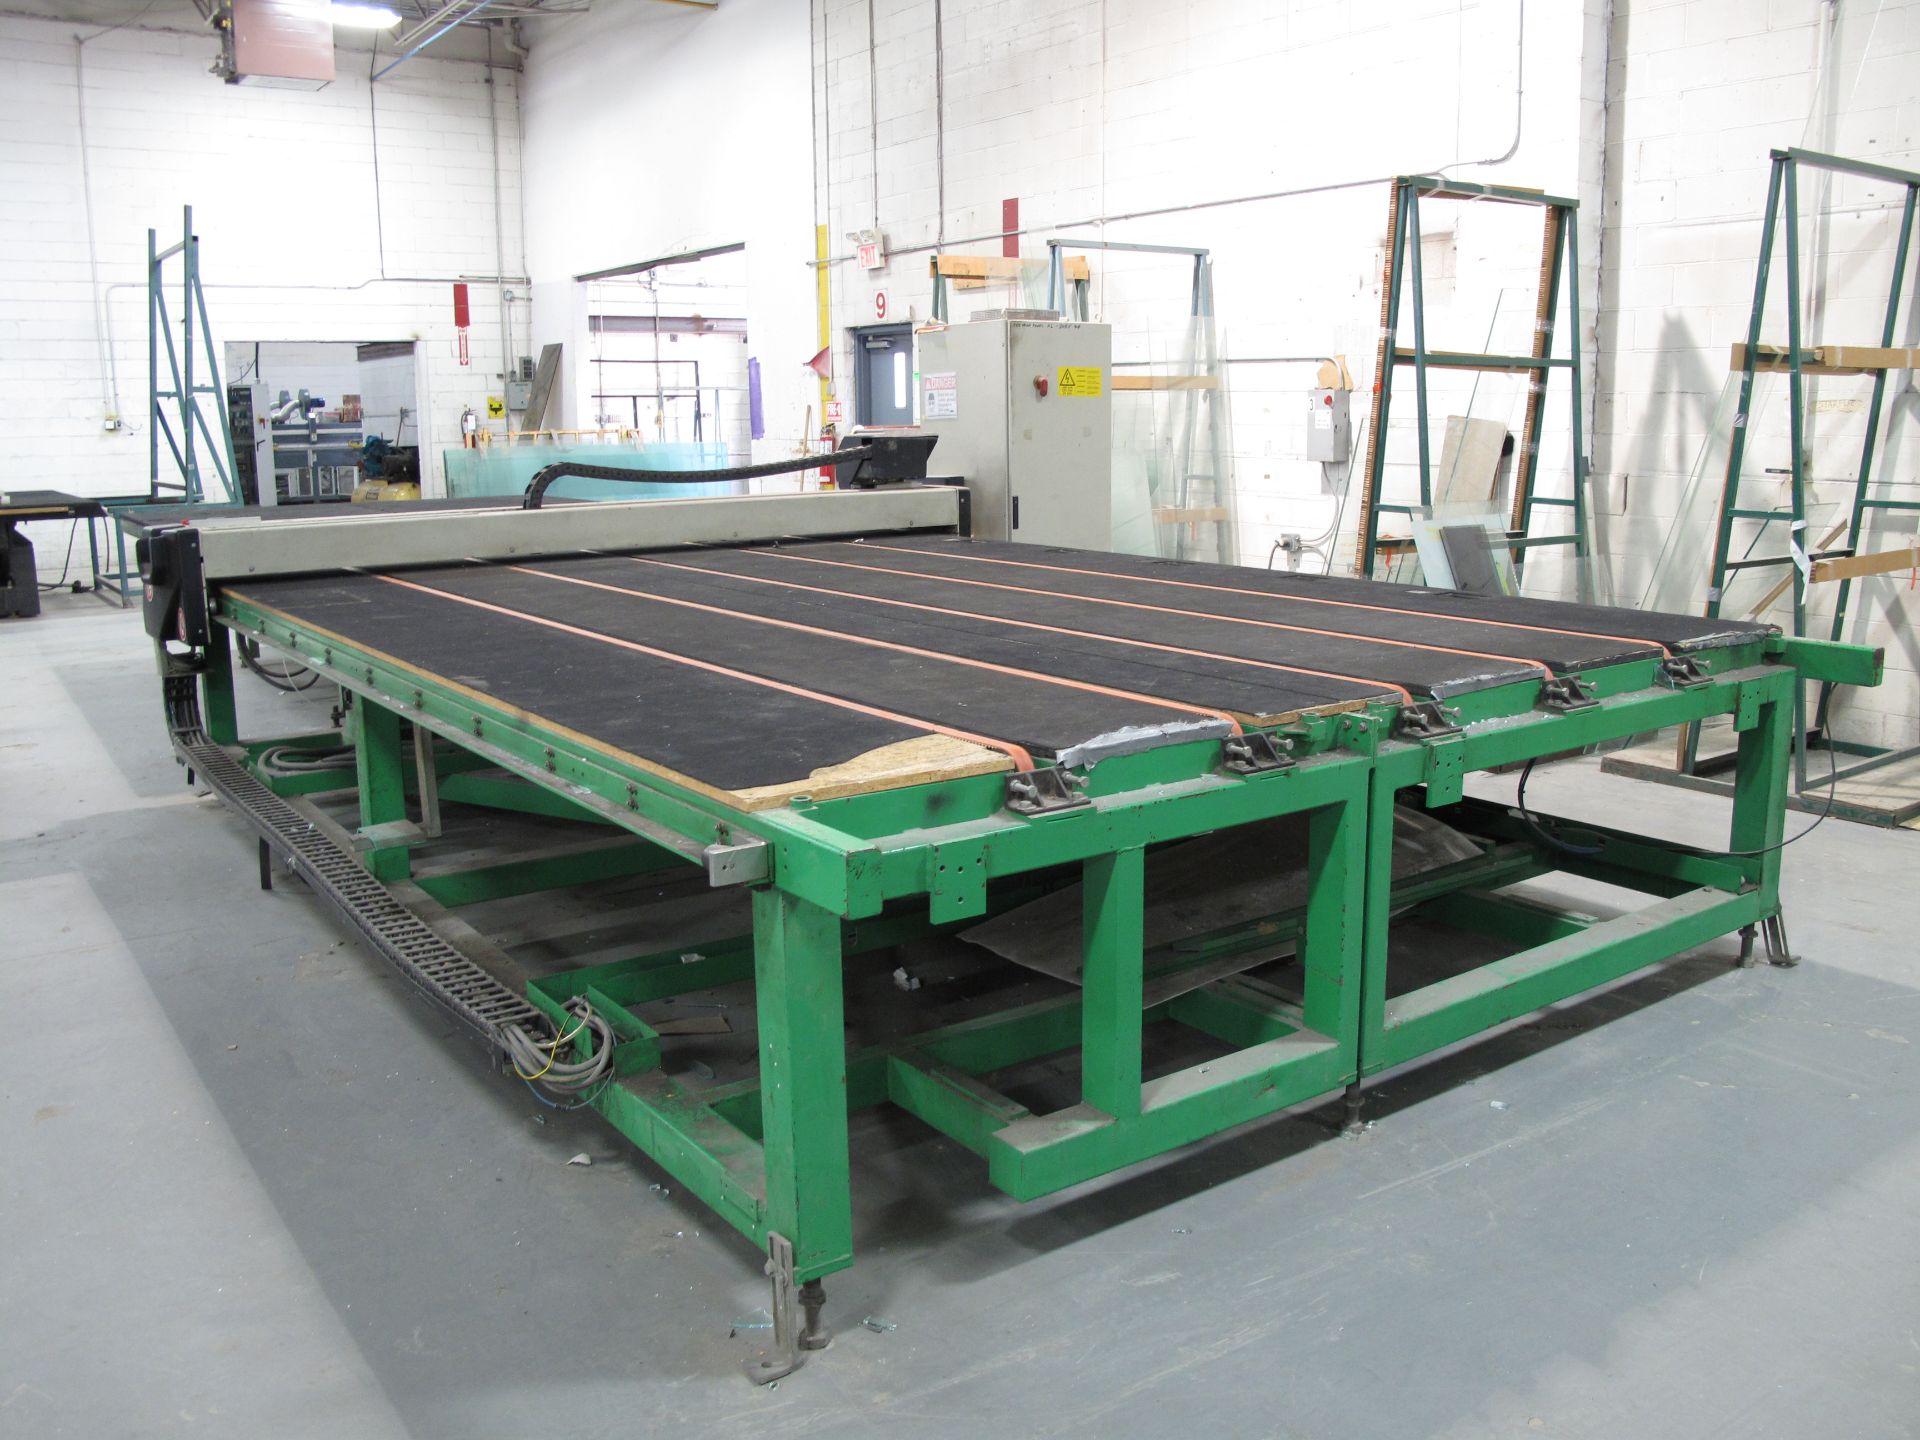 BOTTERO, 340 BCS, 9' X 14' X 10", CNC GLASS CUTTING TABLE WITH HYDRAULIC TILTING OUTFEED TABLE, 2004 - Image 2 of 7